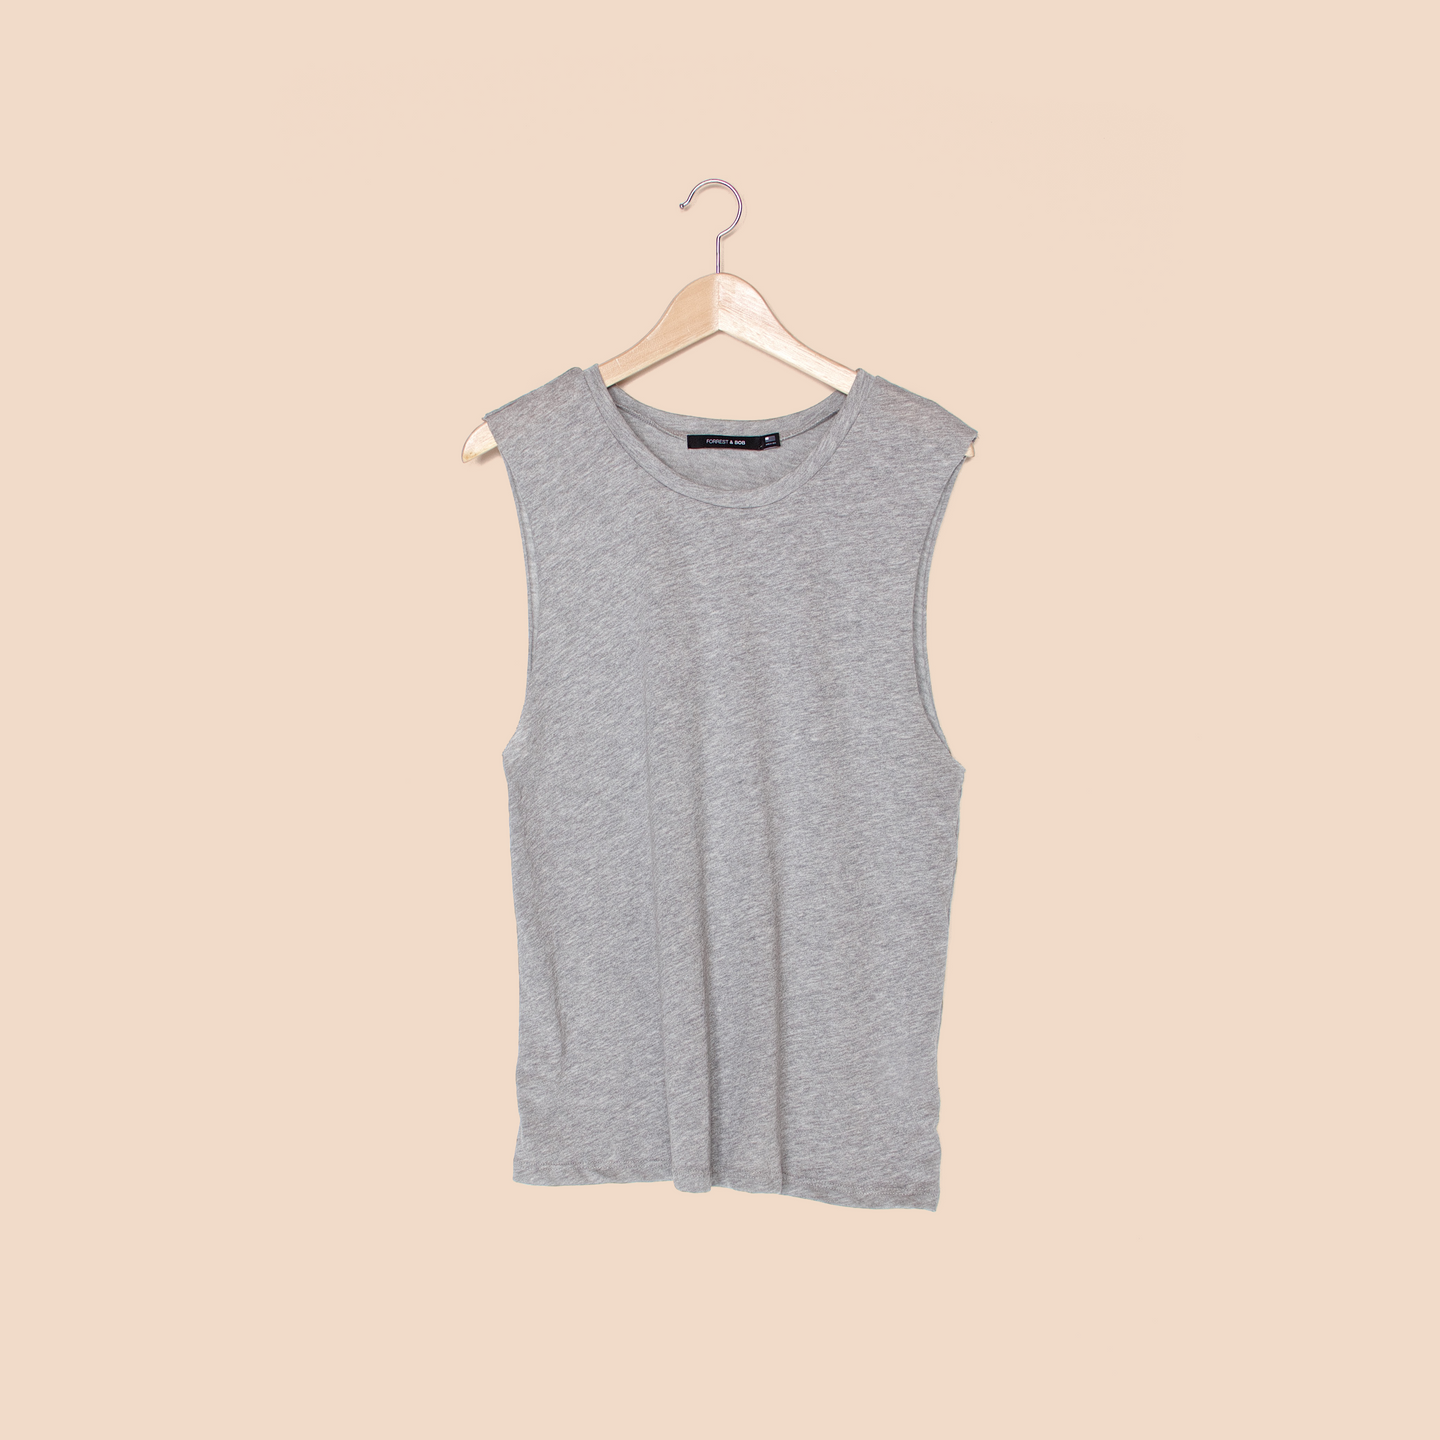 Muscle Tee / Heather Grey - Tanktop - FORREST and BOB